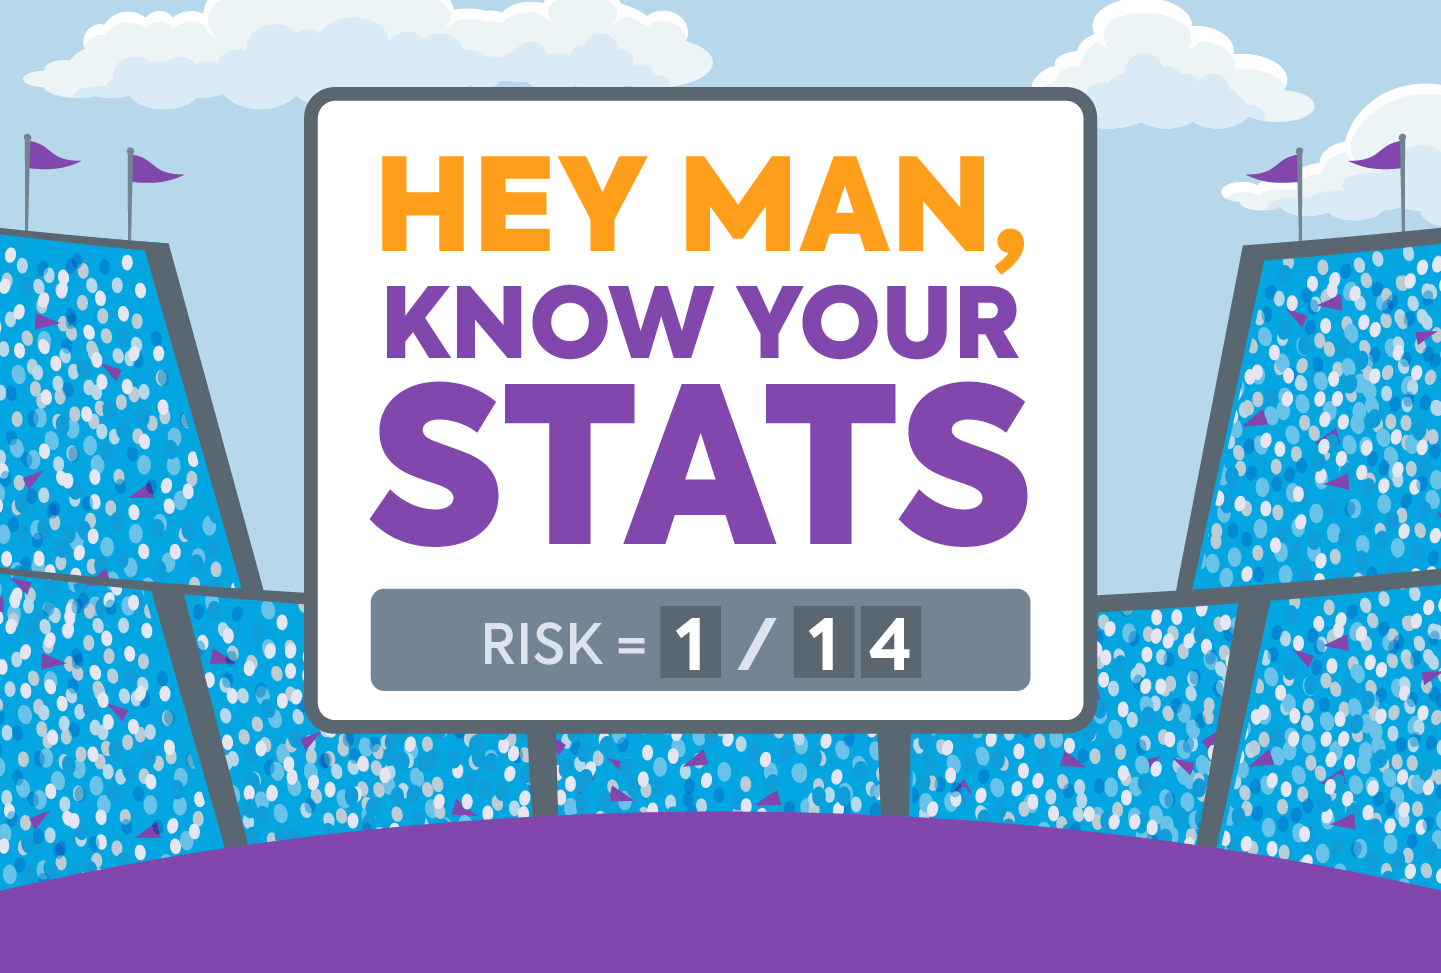 Illustration of sports stadium with scoreboard reading "Hey Man, Know Your Stats" and "Risk = 1/14"